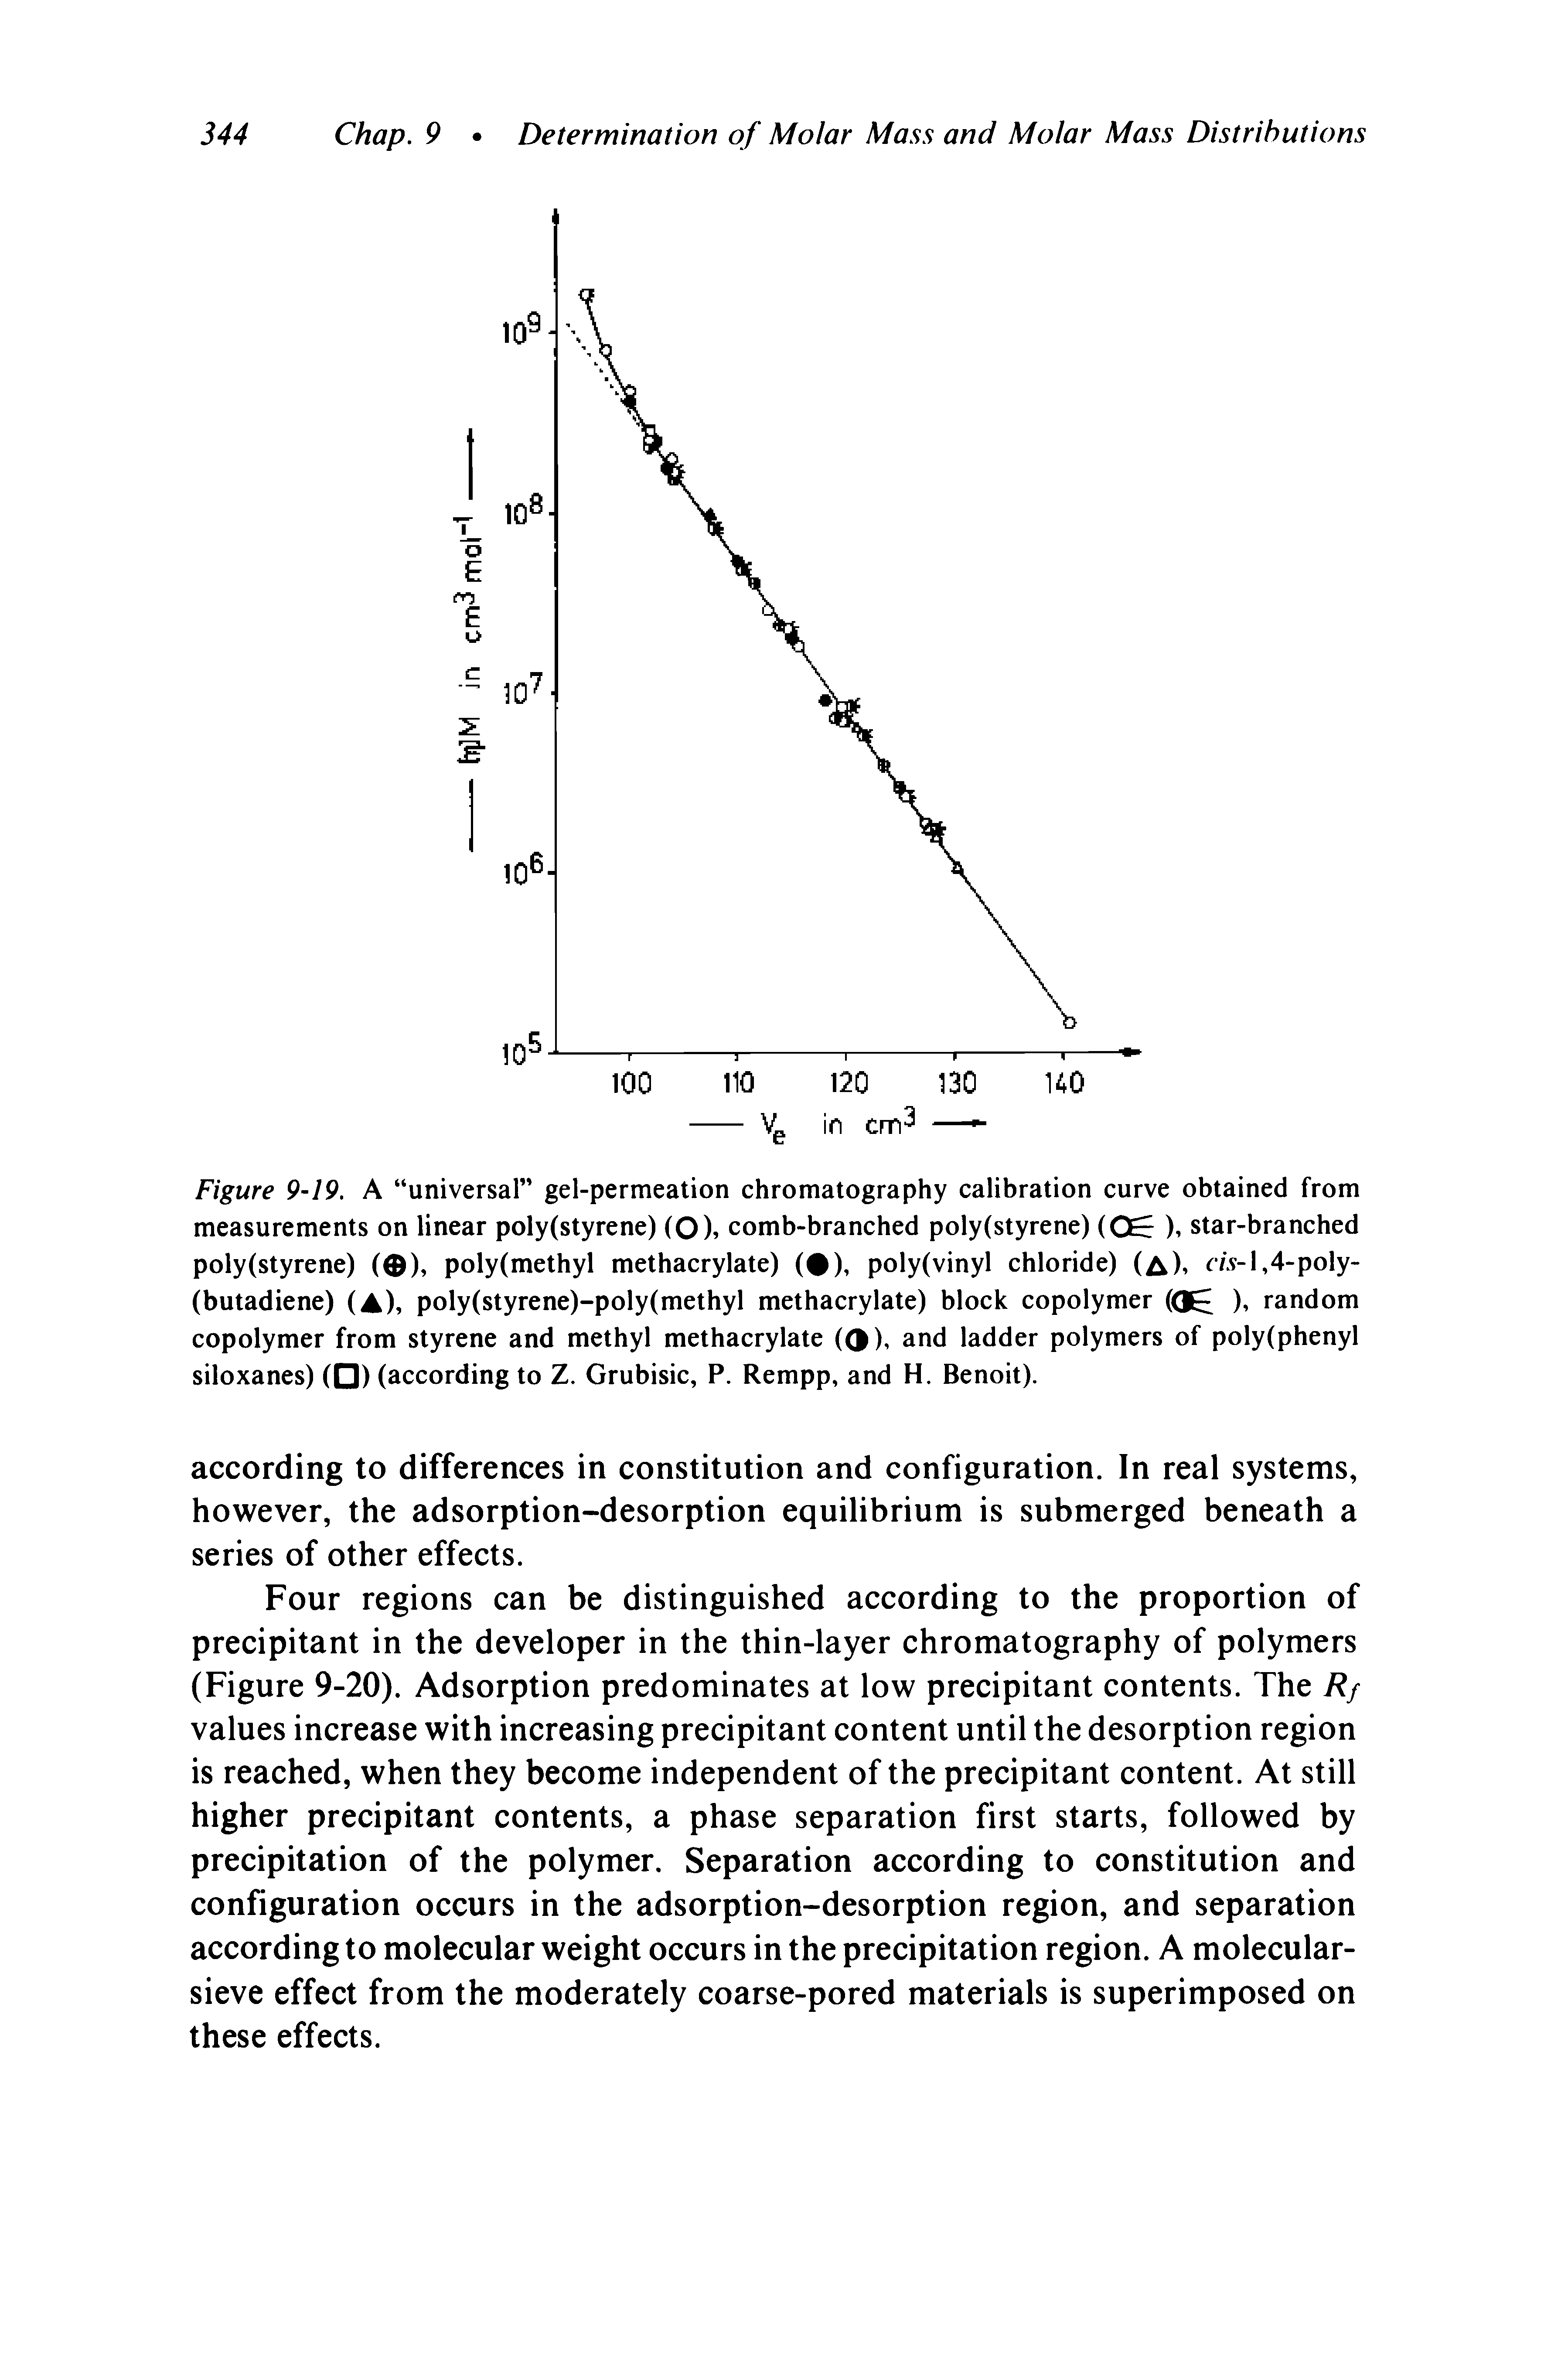 Figure 9-19. A universal gel-permeation chromatography calibration curve obtained from measurements on linear poly(styrene) (O), comb-branched poly(styrene) (O ), star-branched poly(styrene) ( ), poly(methyl methacrylate) ( ), poly(vinyl chloride) (a) c -l,4-poly-(butadiene) (A), poly(styrene)-poly(methyl methacrylate) block copolymer (Qj ), random copolymer from styrene and methyl methacrylate O), and ladder polymers of poly(phenyl siloxanes) ( ) (according to Z. Grubisic, P. Rempp, and H. Benoit).